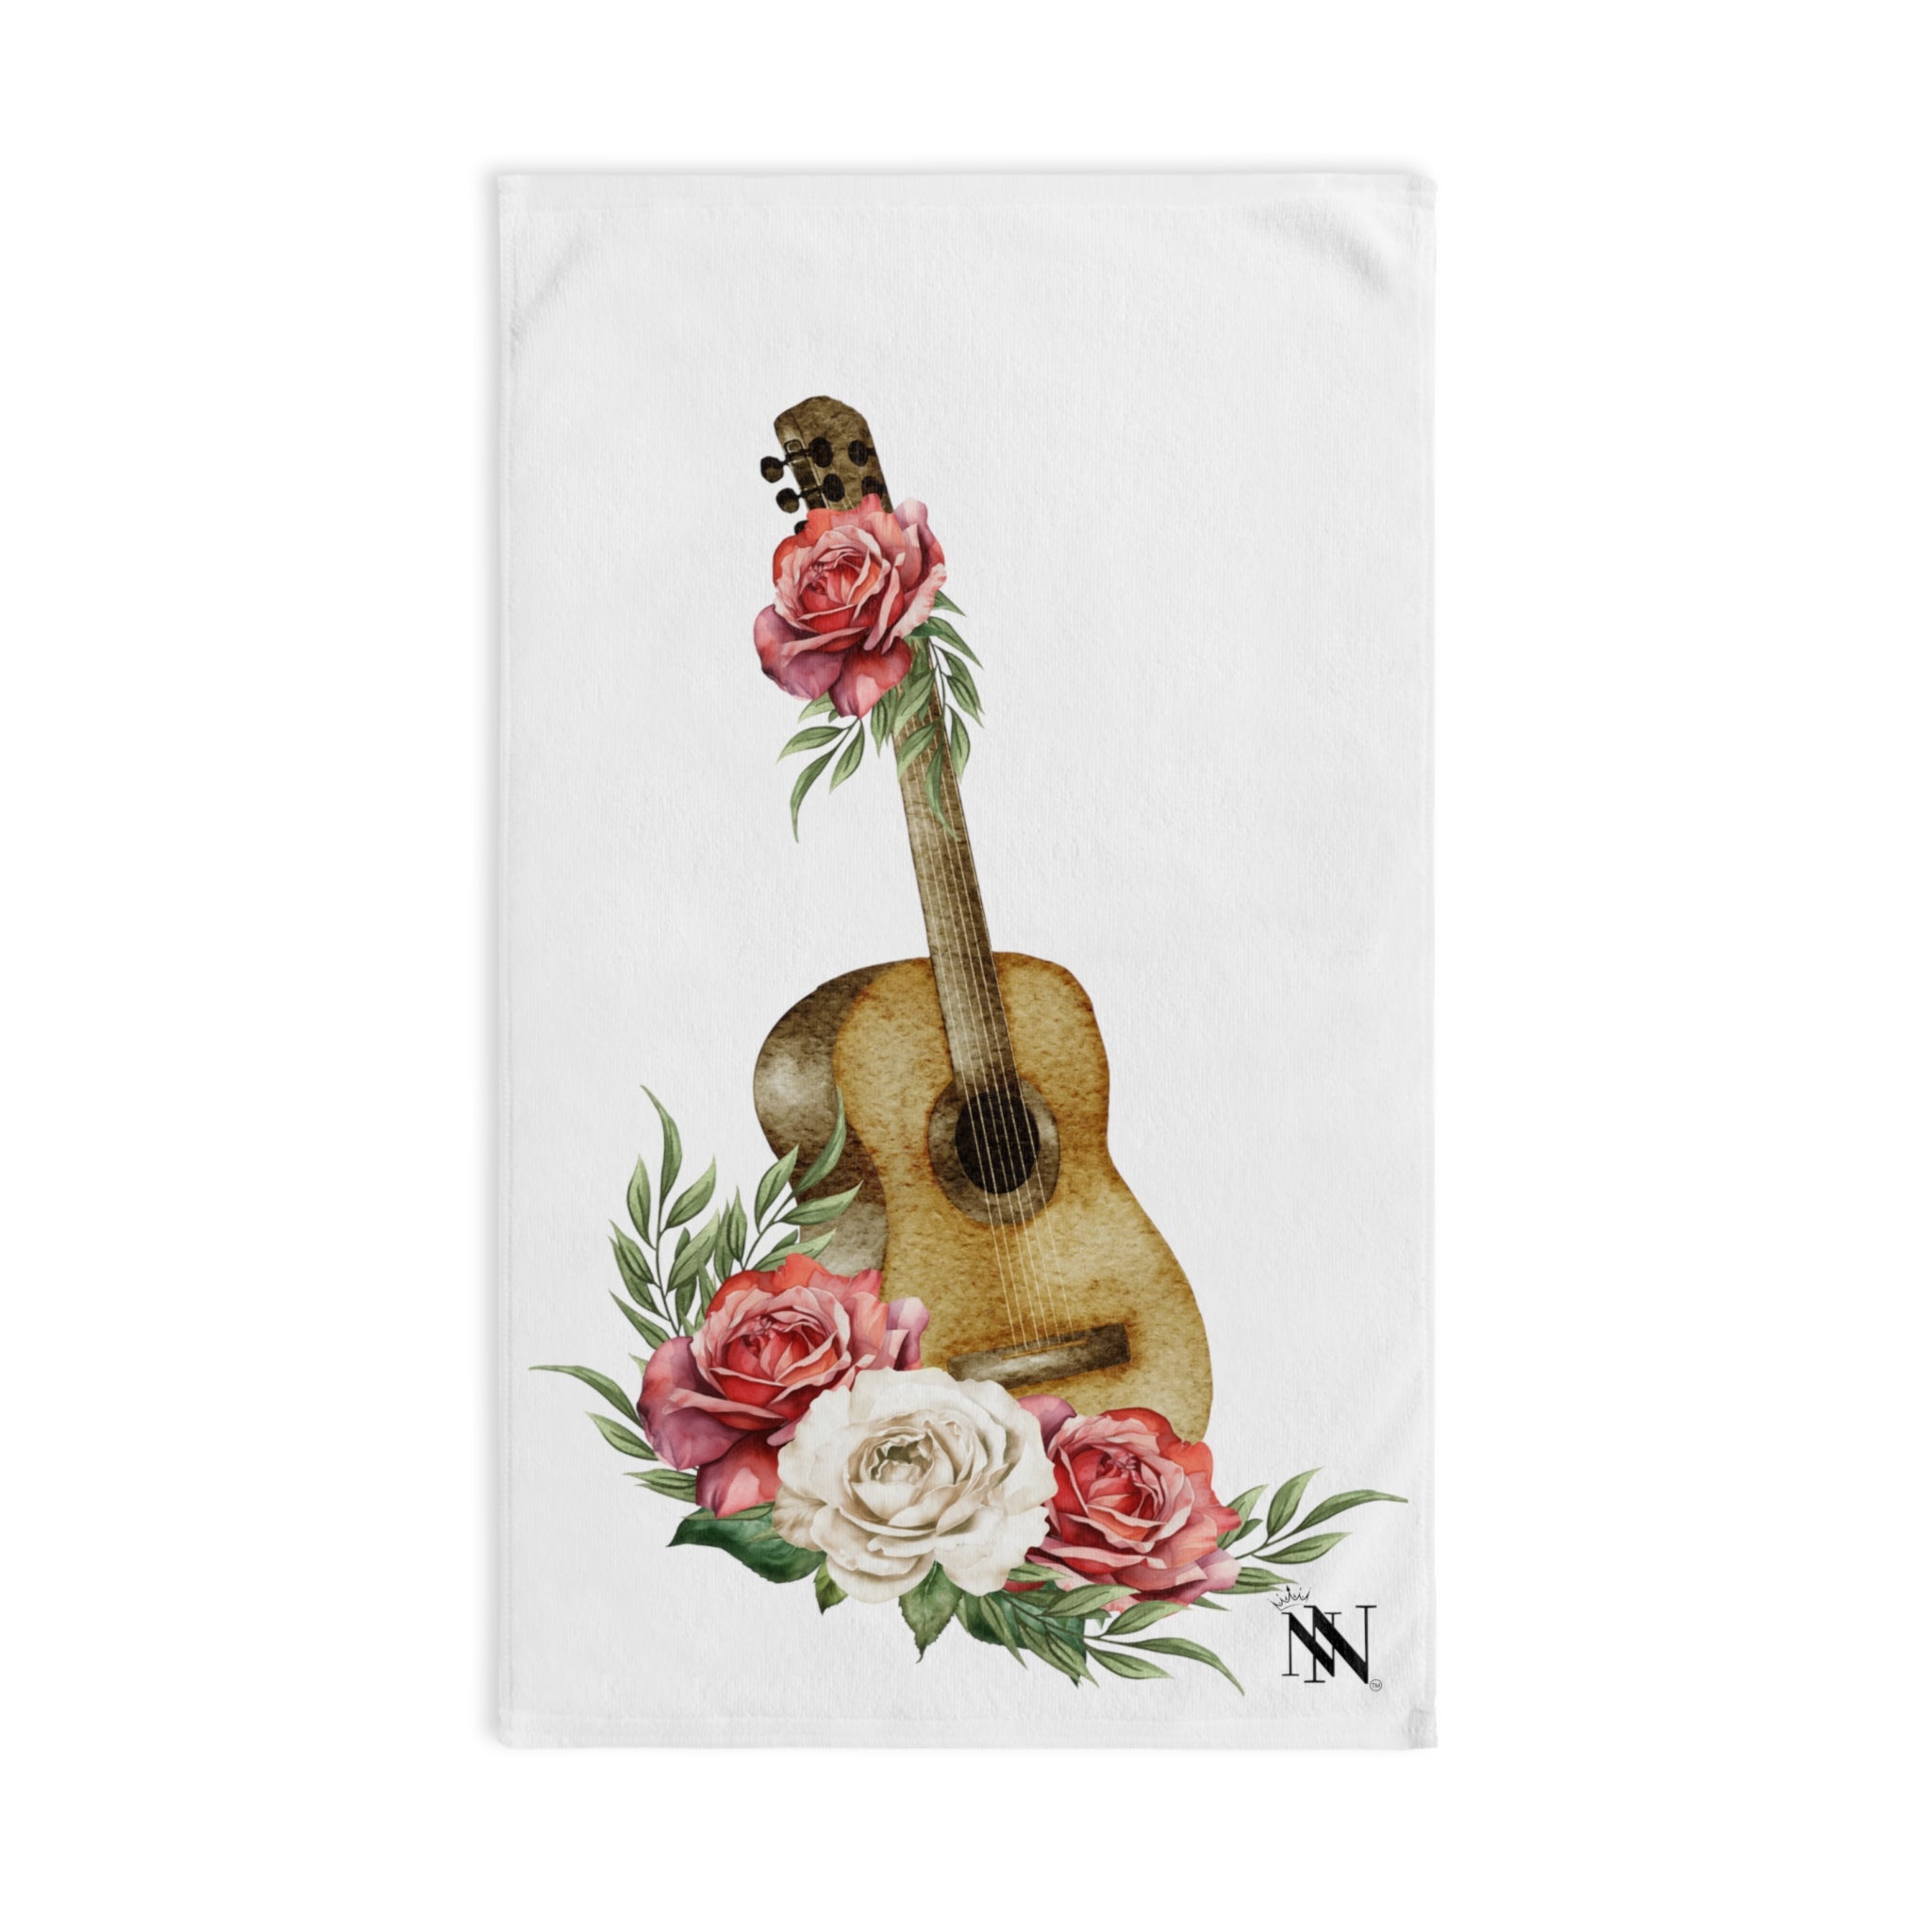 Guitar Rose Vows White | Funny Gifts for Men - Gifts for Him - Birthday Gifts for Men, Him, Her, Husband, Boyfriend, Girlfriend, New Couple Gifts, Fathers & Valentines Day Gifts, Christmas Gifts NECTAR NAPKINS